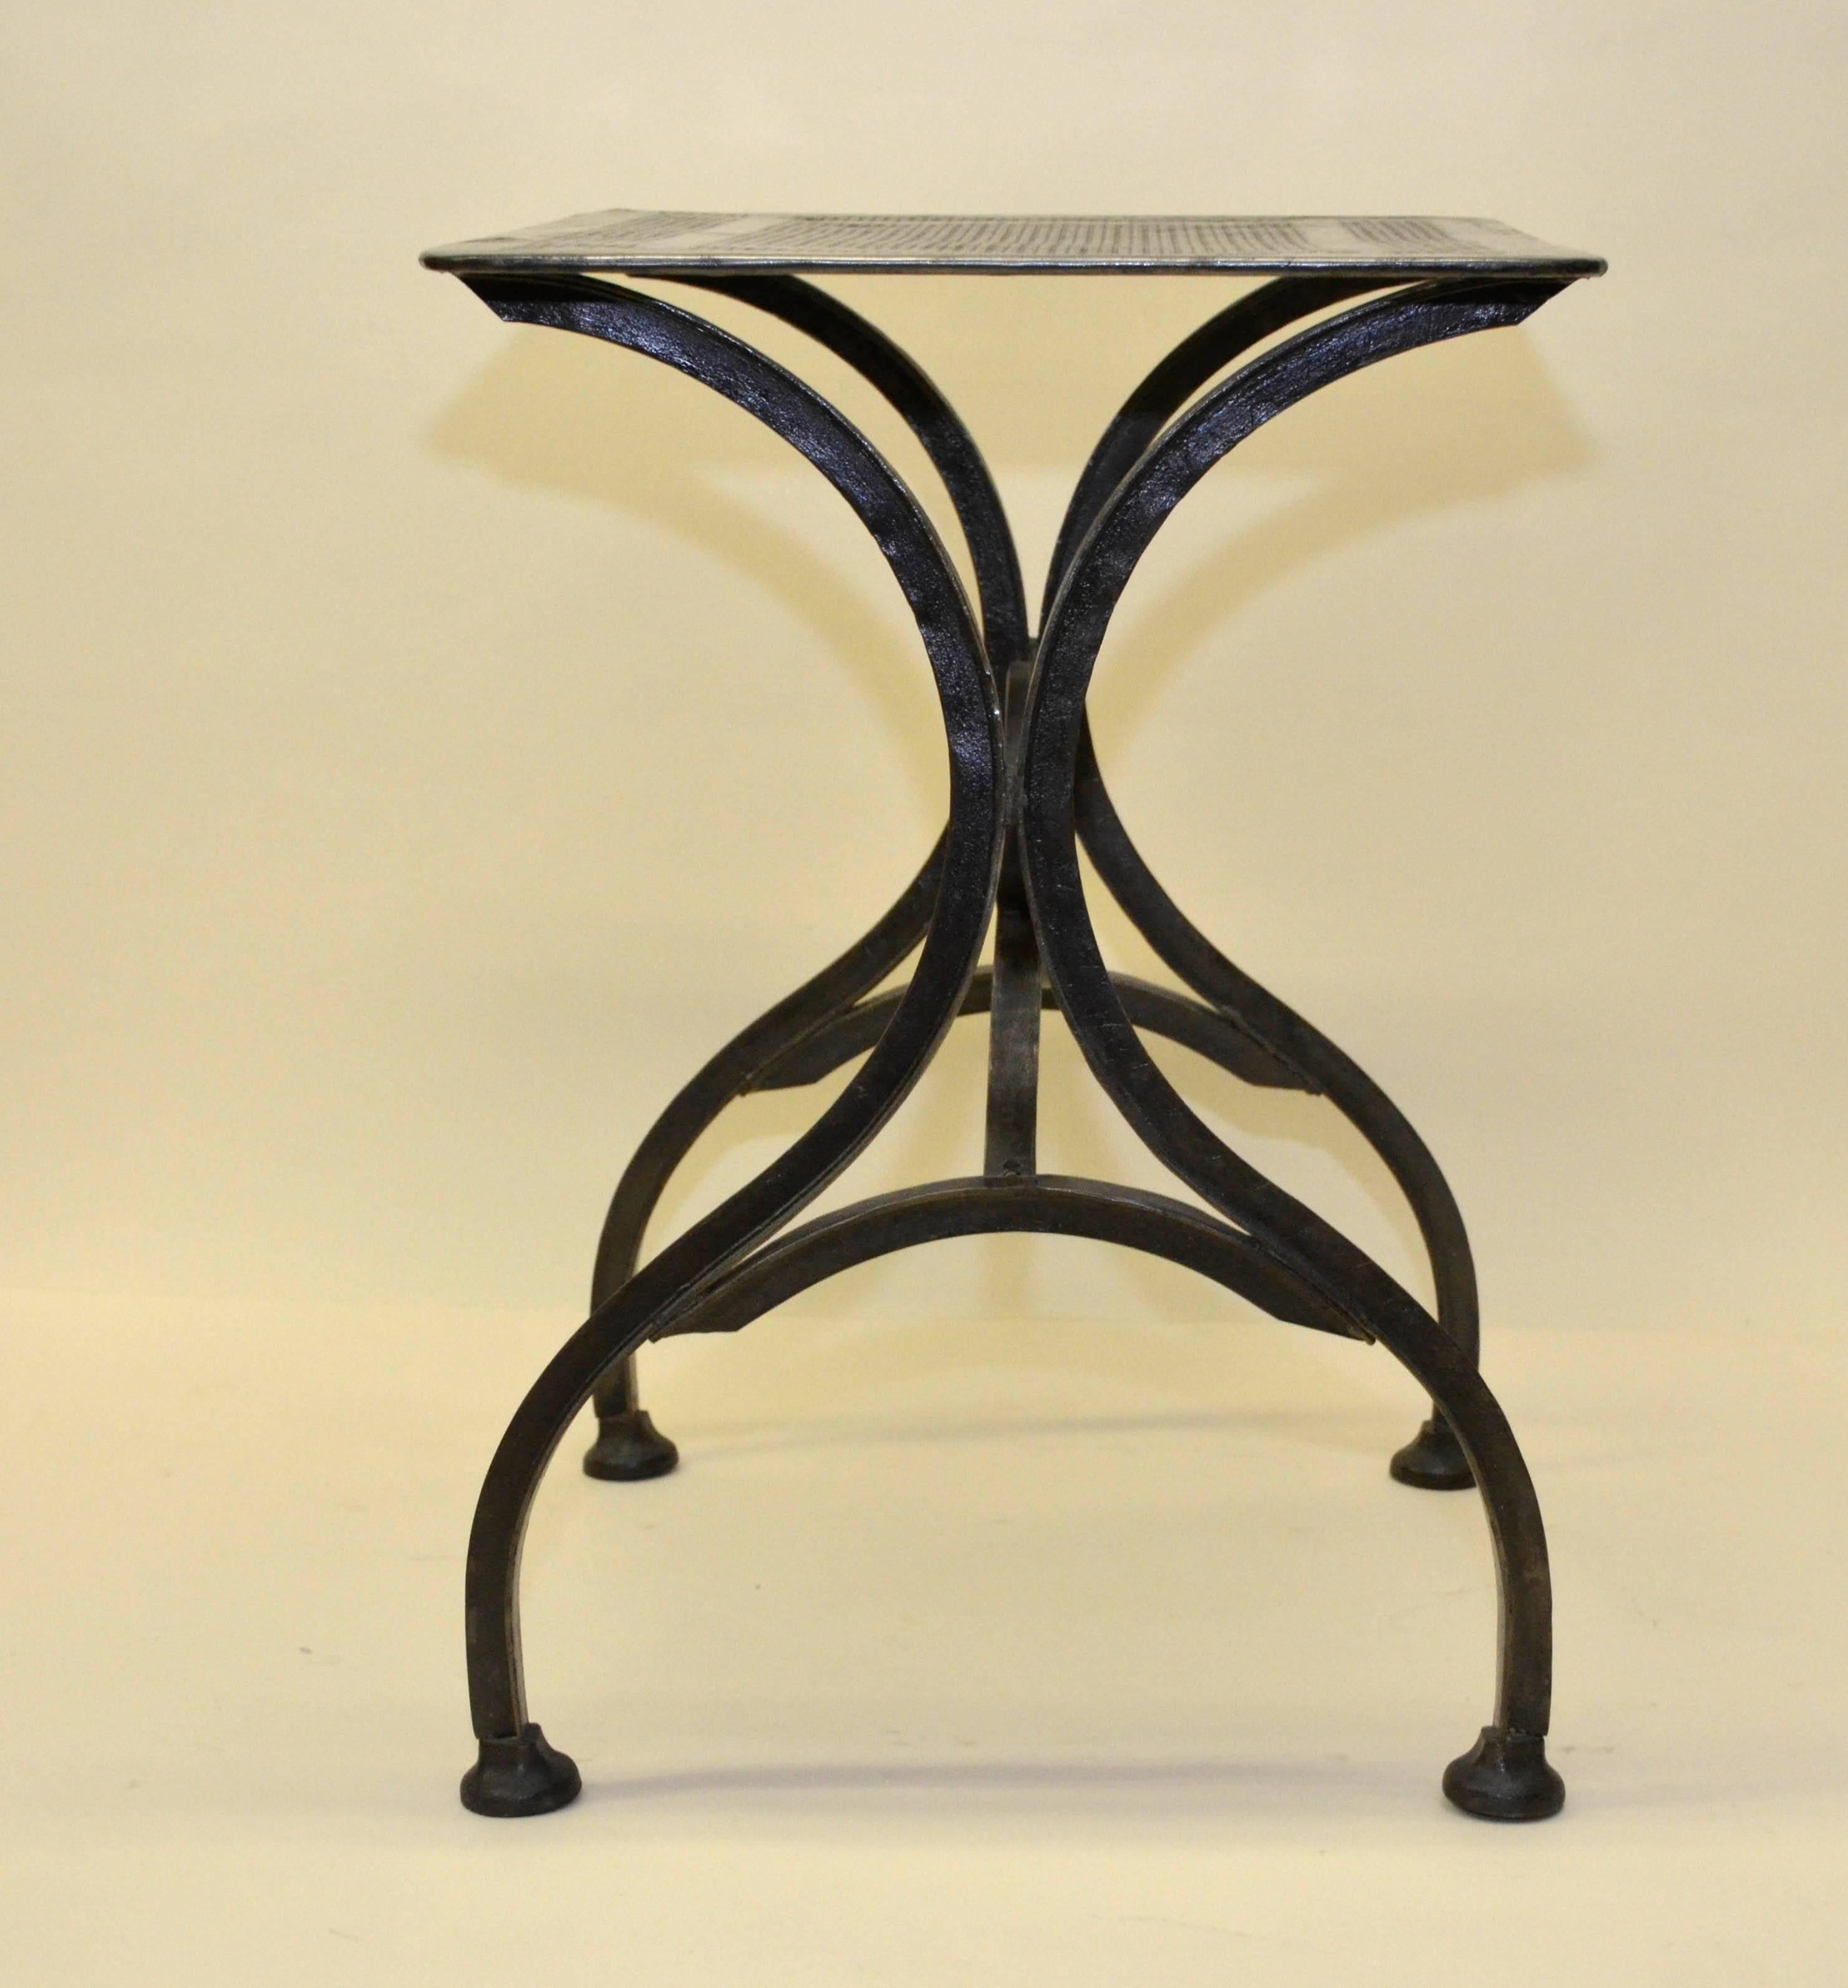 1930s Vintage Italian Stripped Metal Garden Table For Sale 8